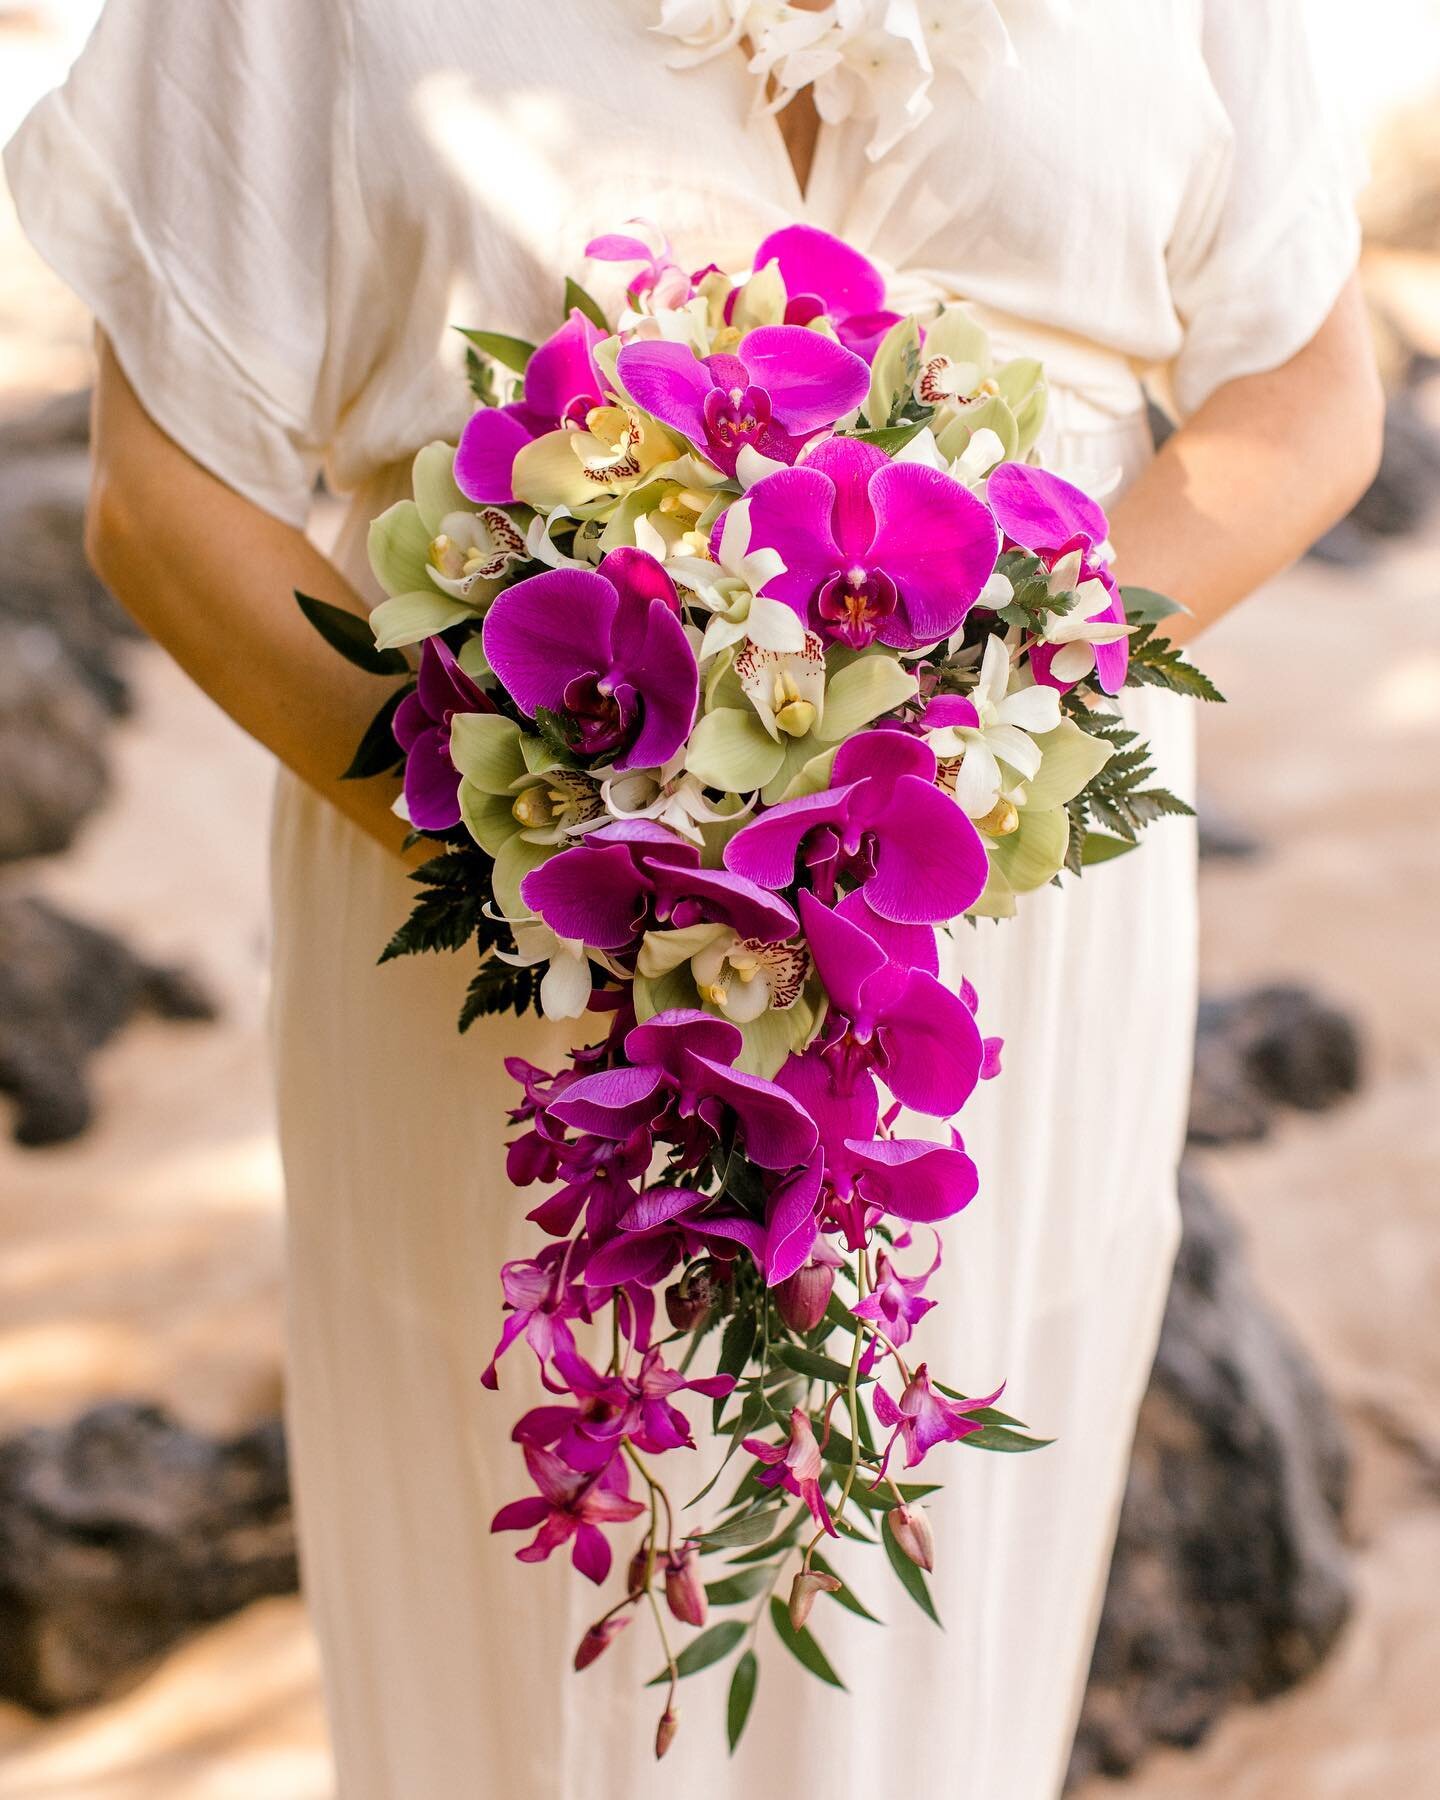 Isn&rsquo;t this orchid bouquet just stunning?! Today is 💜 in @vanessahicksphotography #coloryourfeed challenge. I immediately thought about this image when planning for today 😍

#bridalbouquet #tropicalbouquet #destinationwedding #destinationweddi